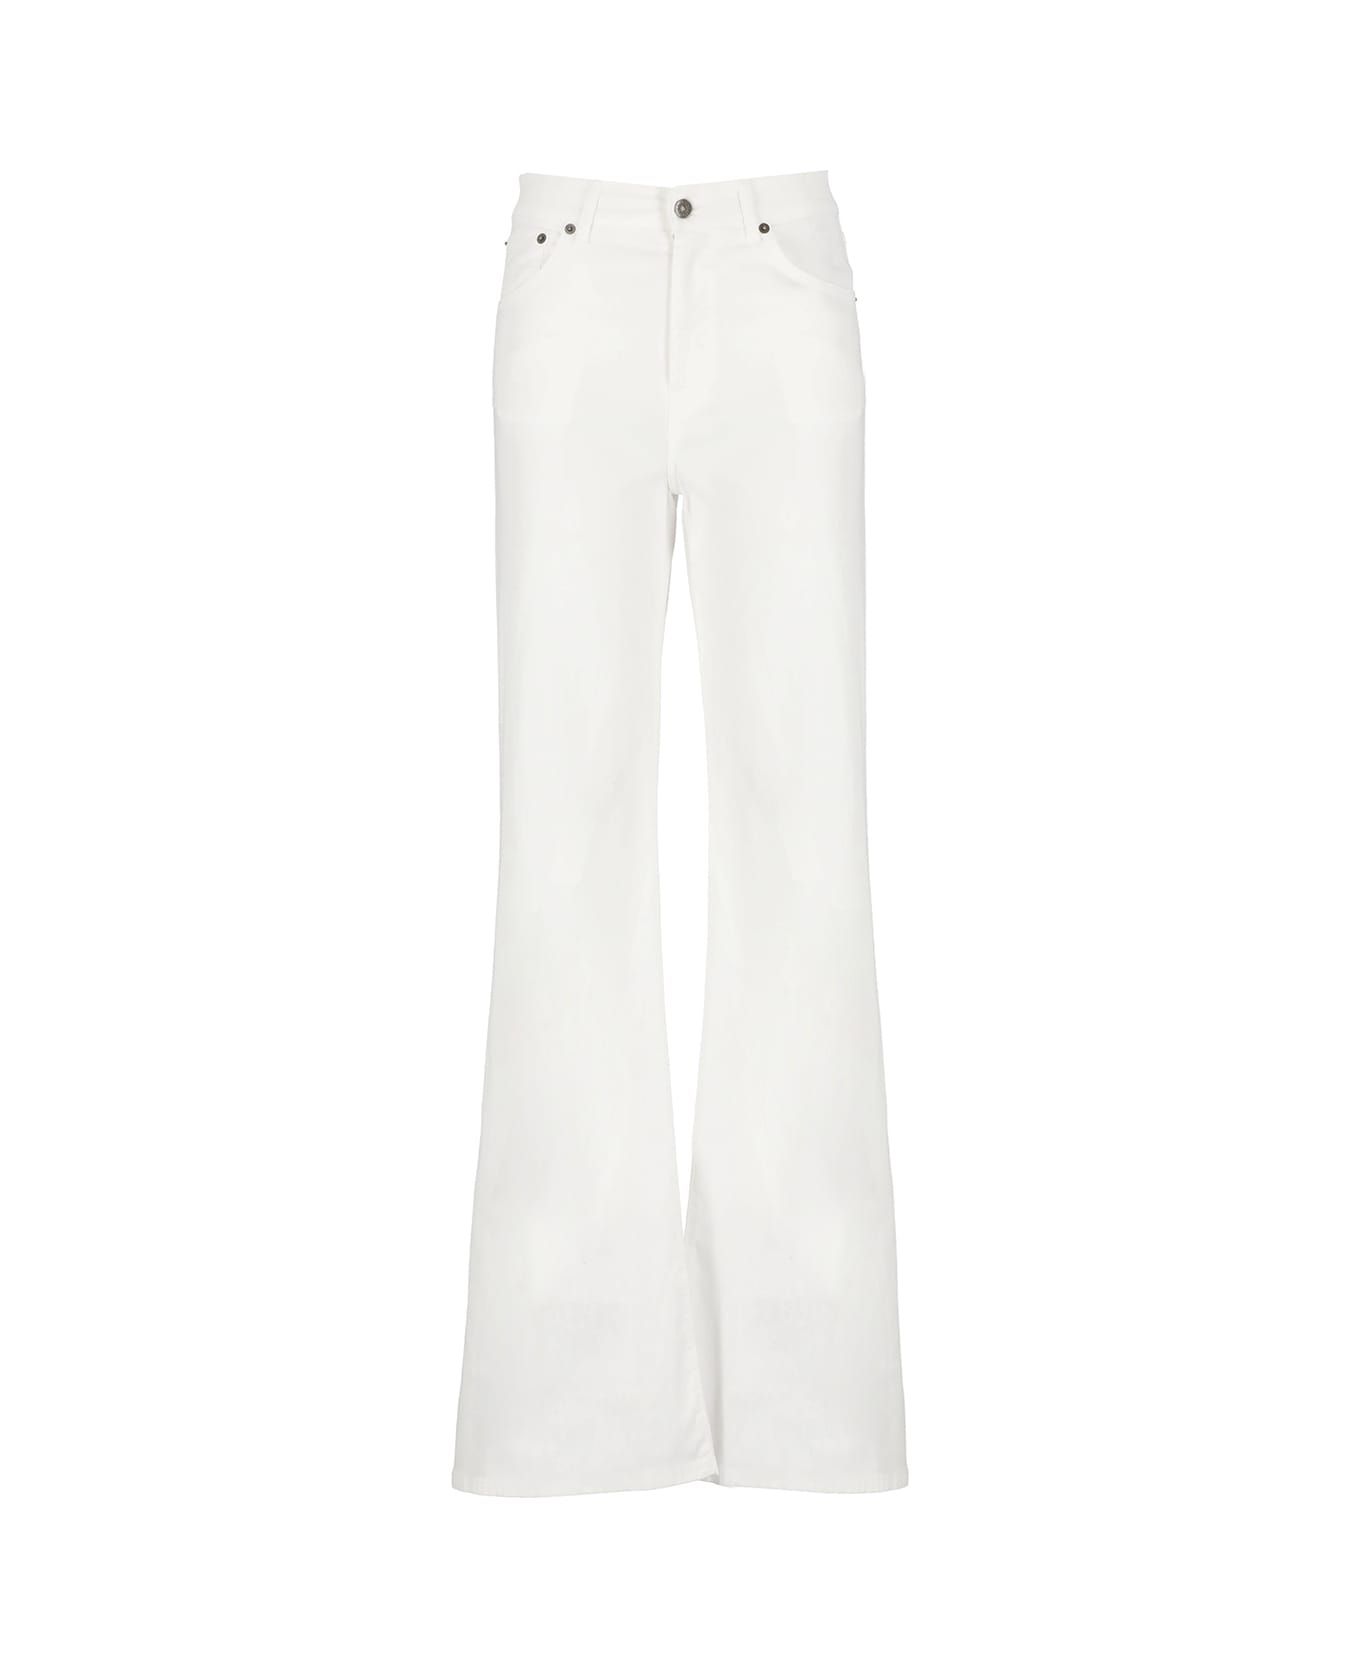 Dondup Cotton Blend Trousers - White ボトムス